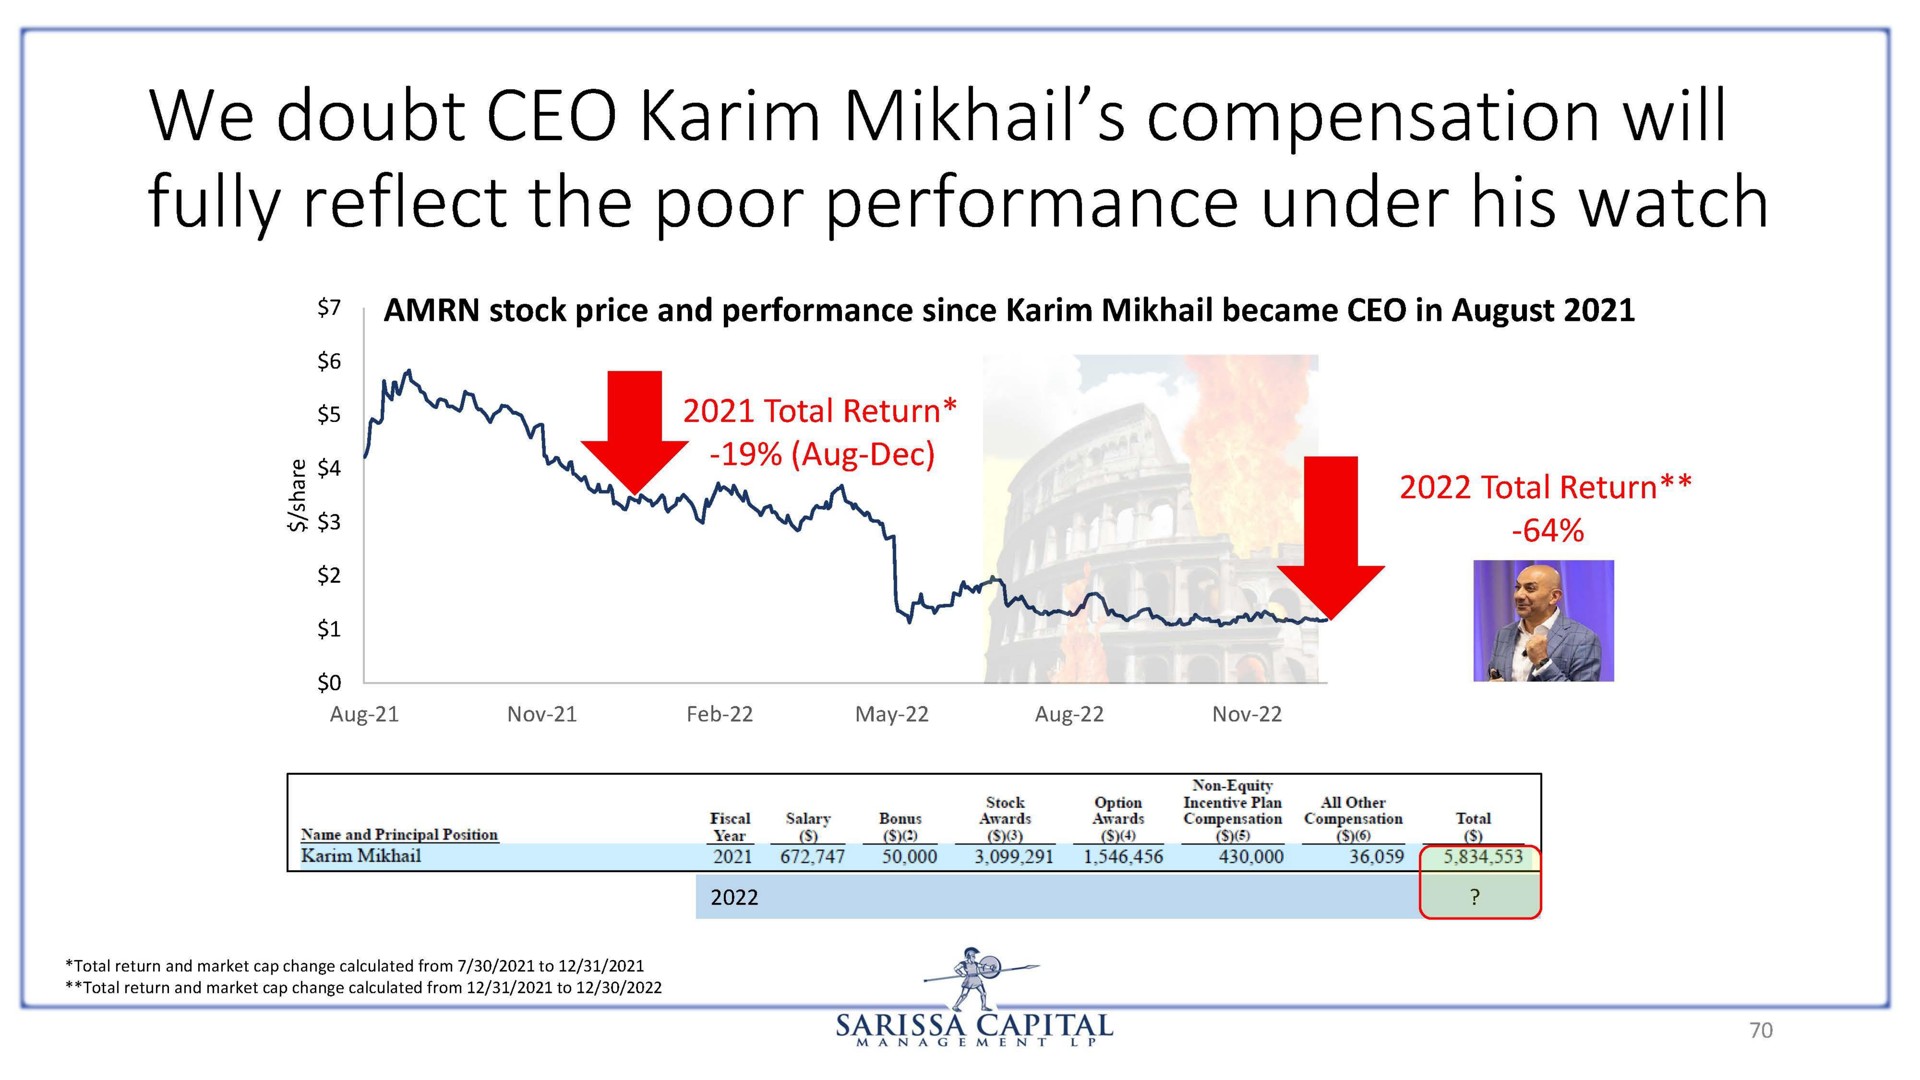 we doubt compensation will fully reflect the poor performance under his watch | Sarissa Capital